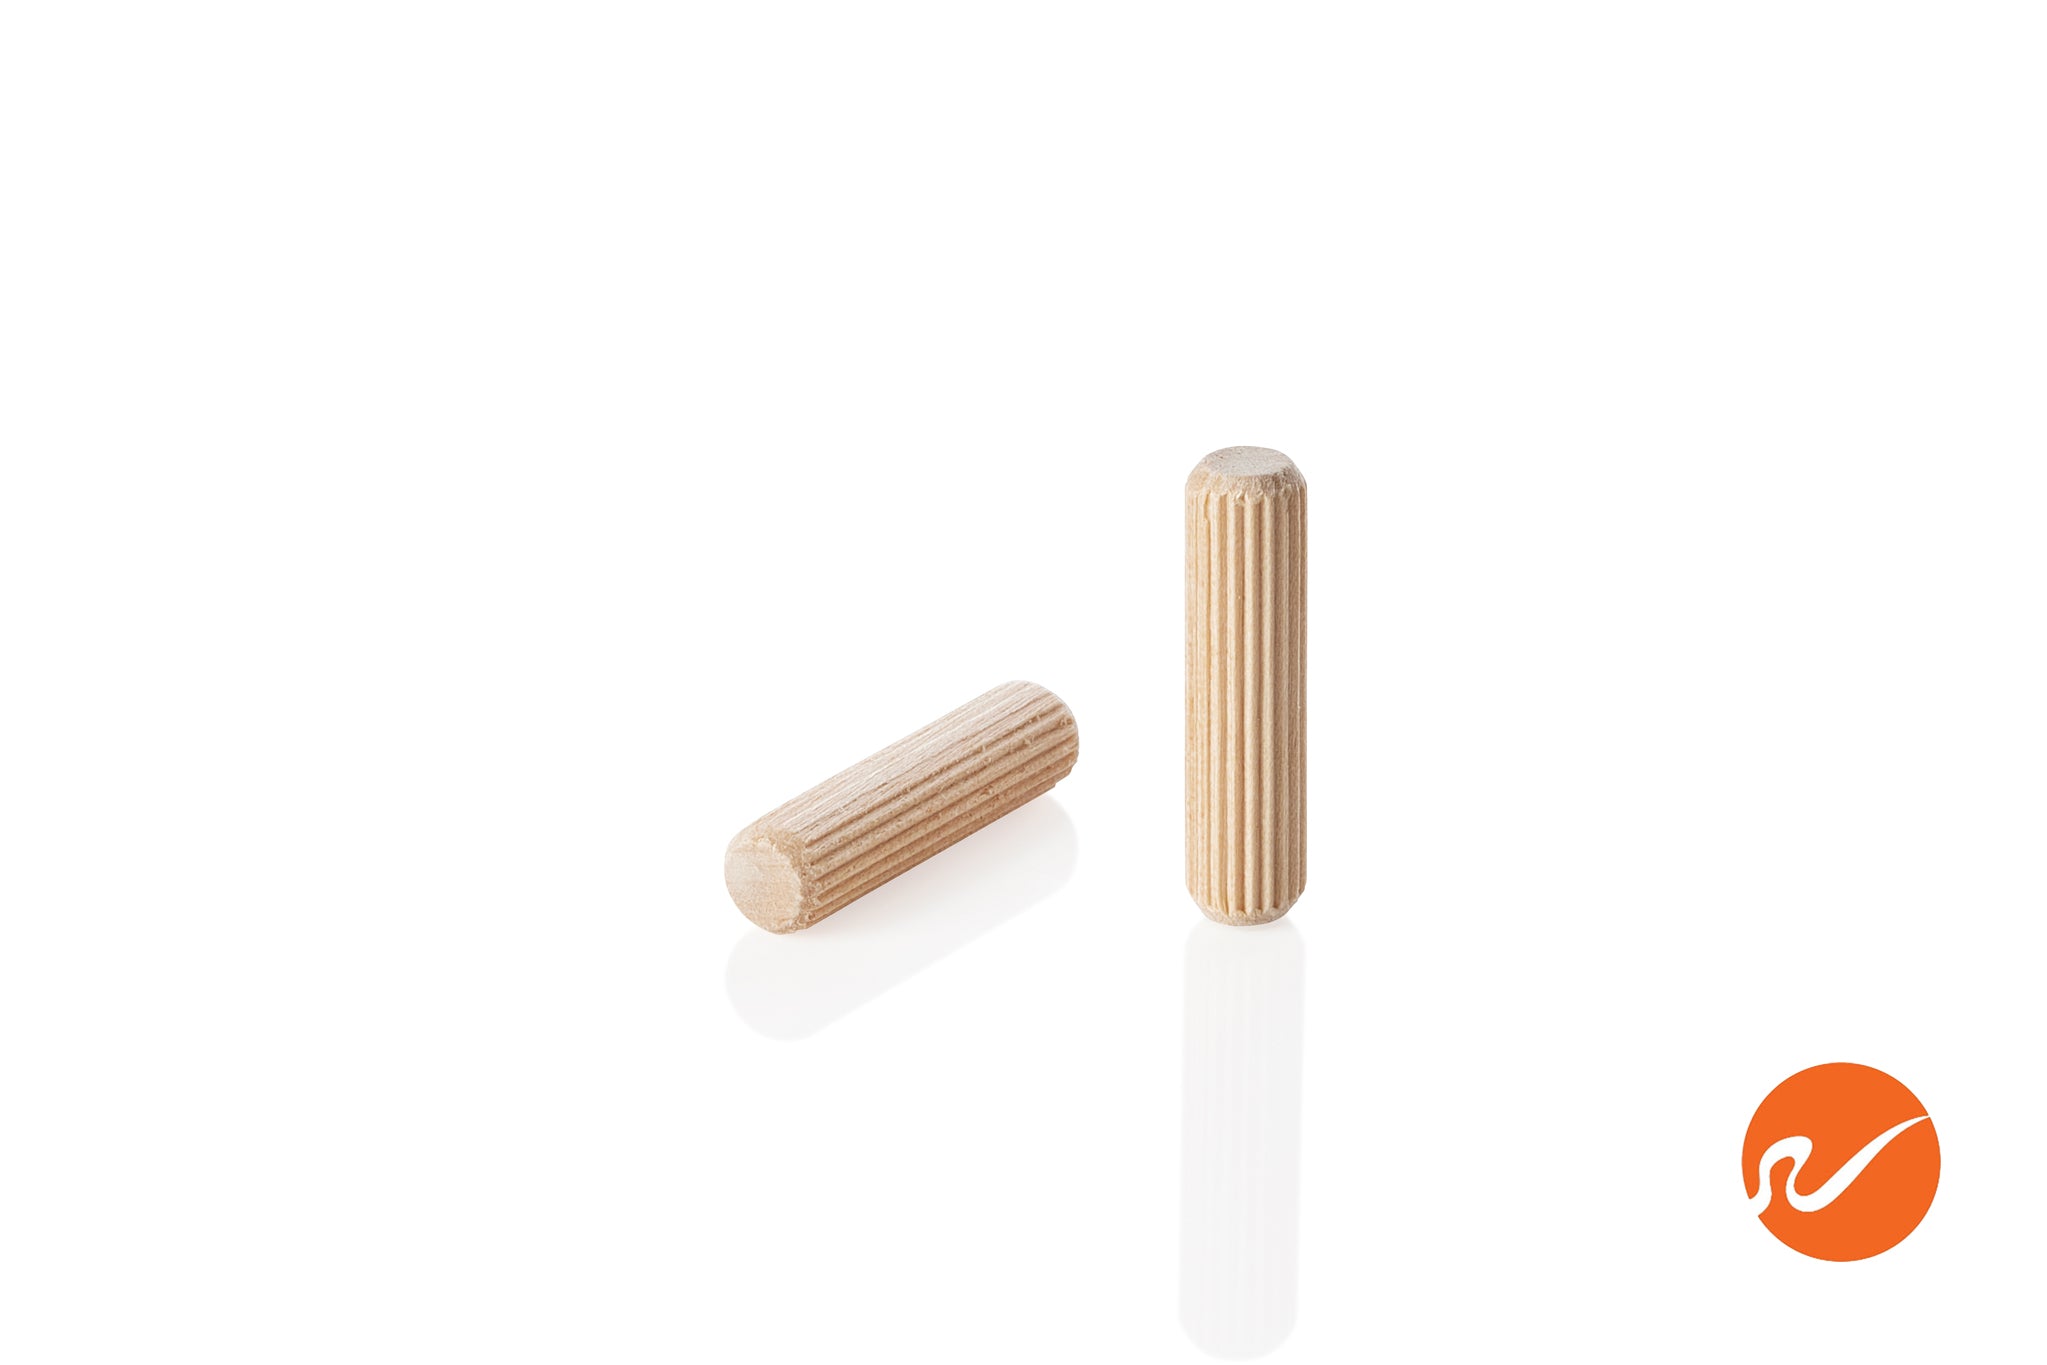 Wooden Dowel Pins Grooved Dowels Plugs Chamfered Fluted Pin Wood